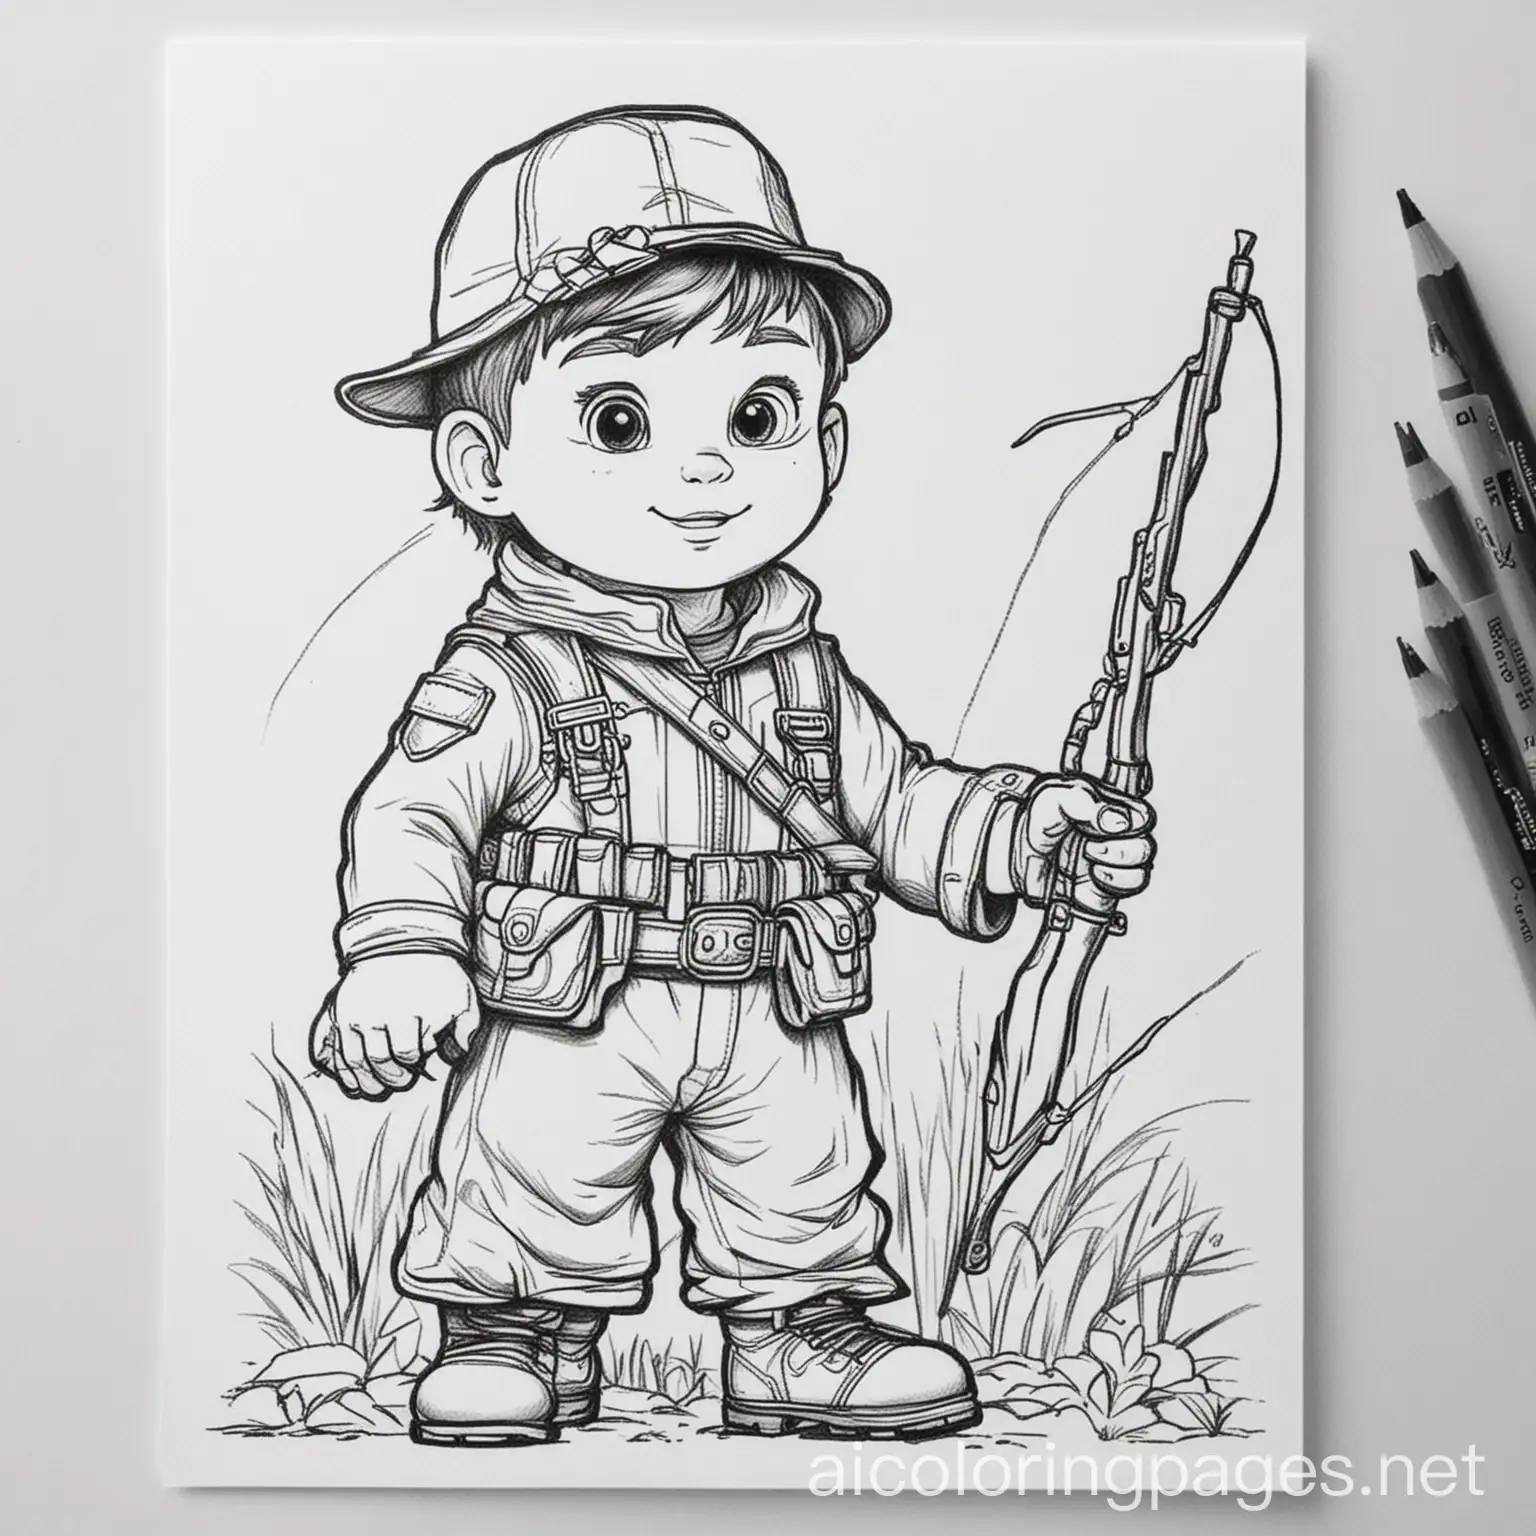 hunter, Coloring Page, black and white, line art, white background, Simplicity, Ample White Space. The background of the coloring page is plain white to make it easy for young children to color within the lines. The outlines of all the subjects are easy to distinguish, making it simple for kids to color without too much difficulty